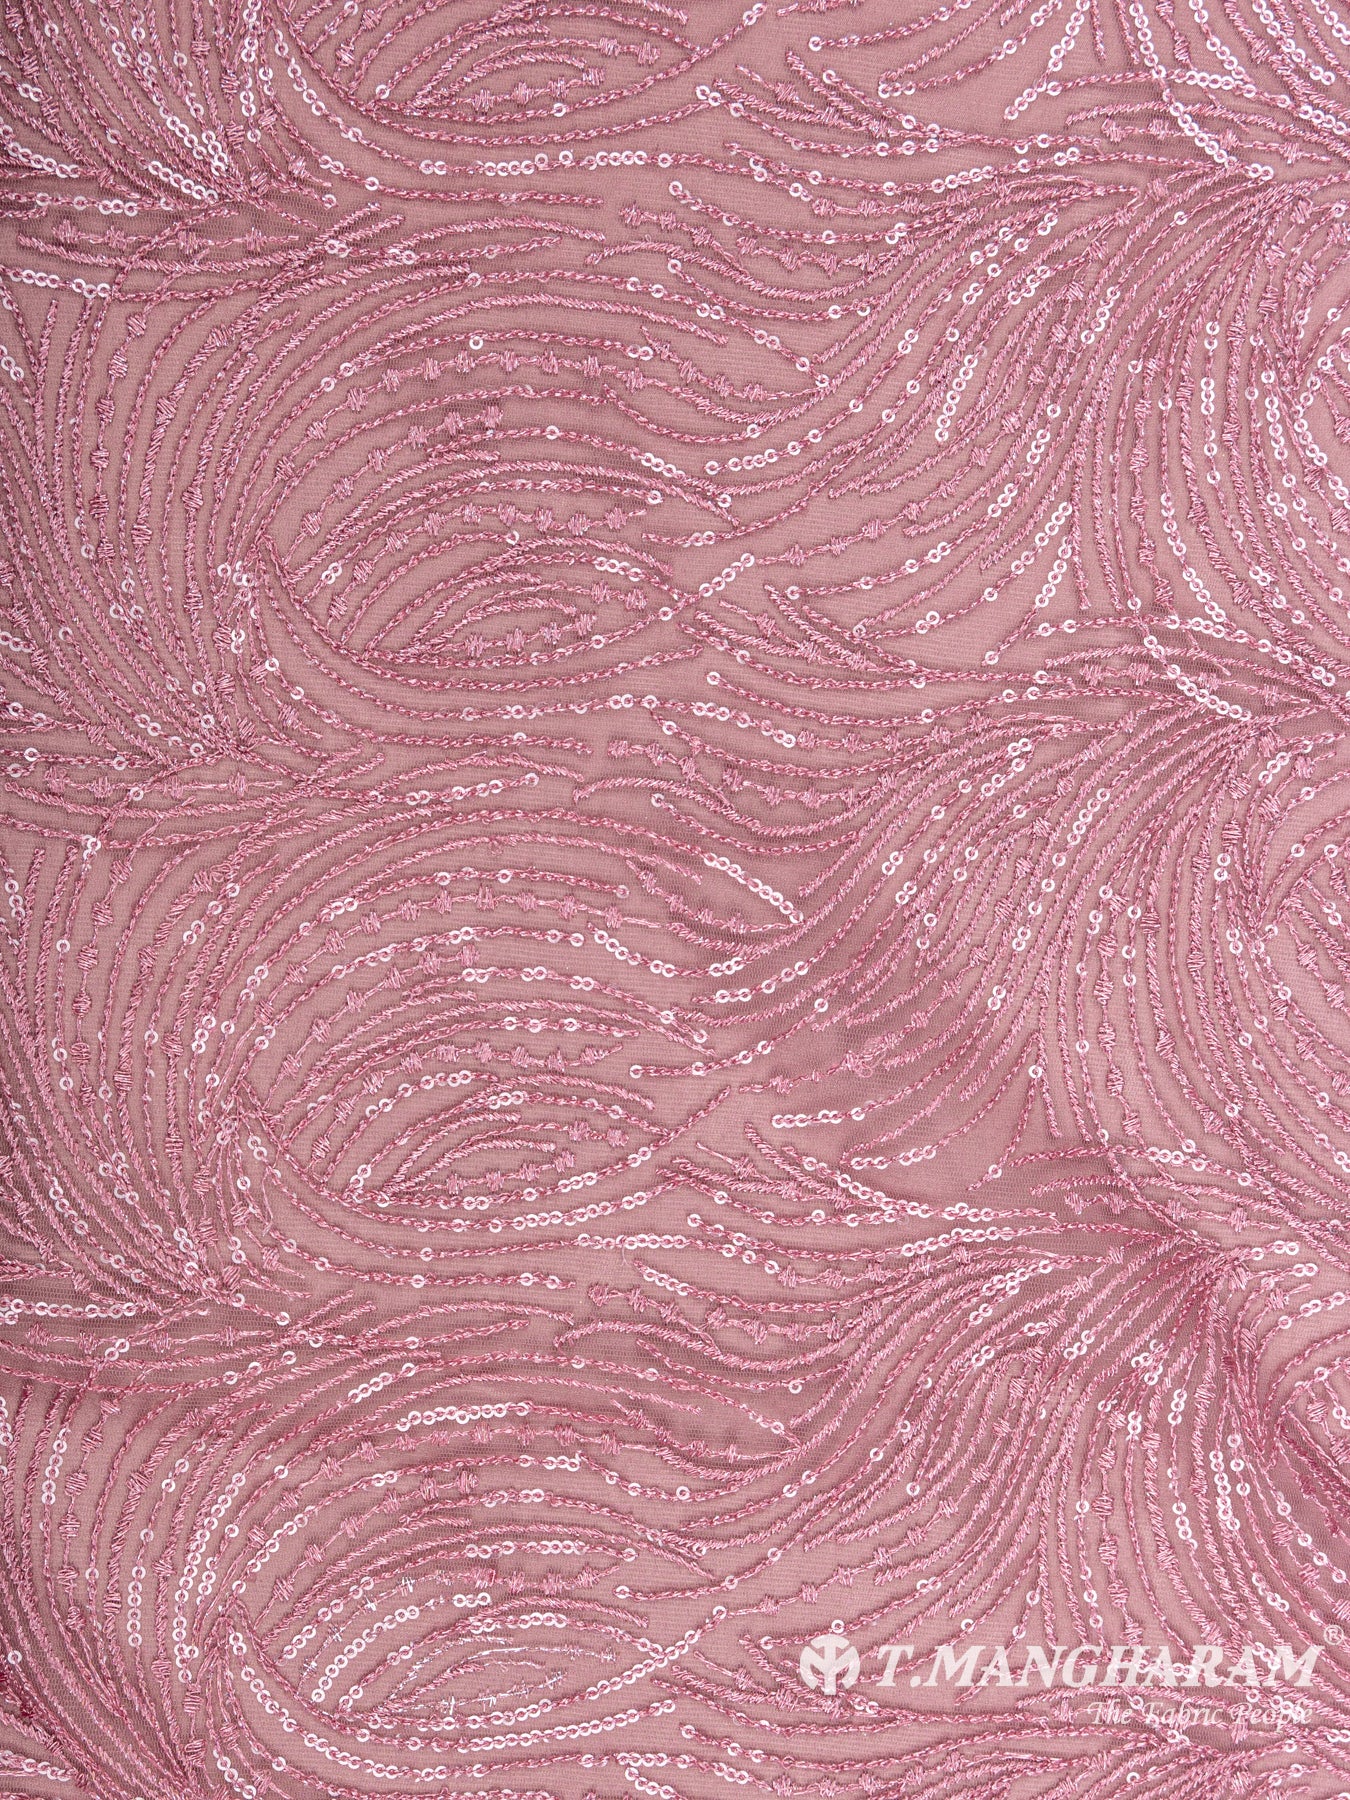 Pink Net Embroidery Fabric - EC6344 view-3